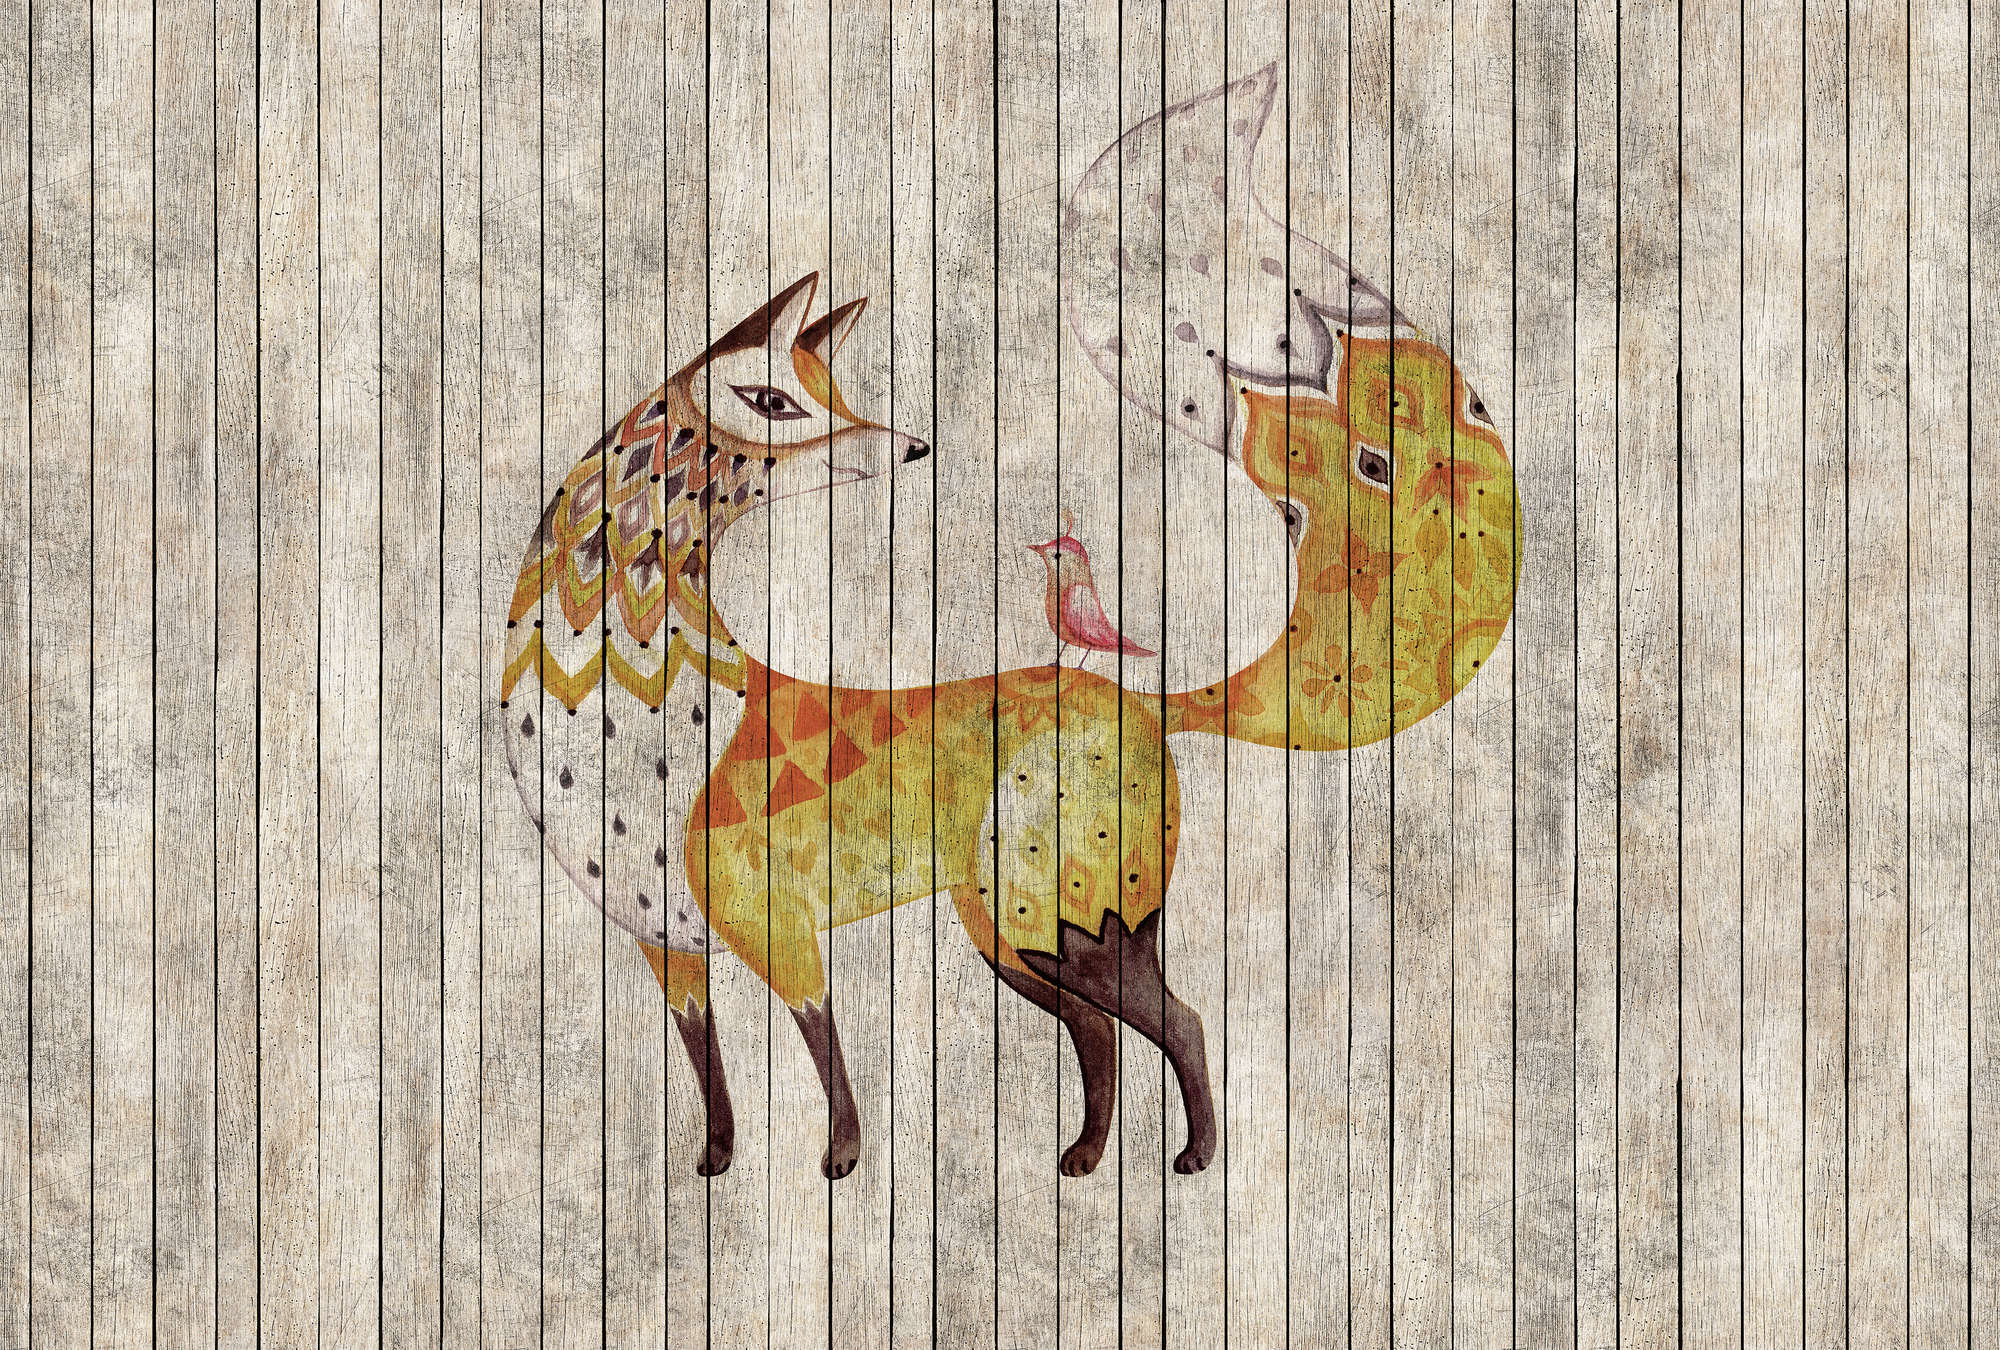             Fairy tale 2 - Fox and bird on wood effect wallpaper - Beige, Brown | Pearl smooth non-woven
        